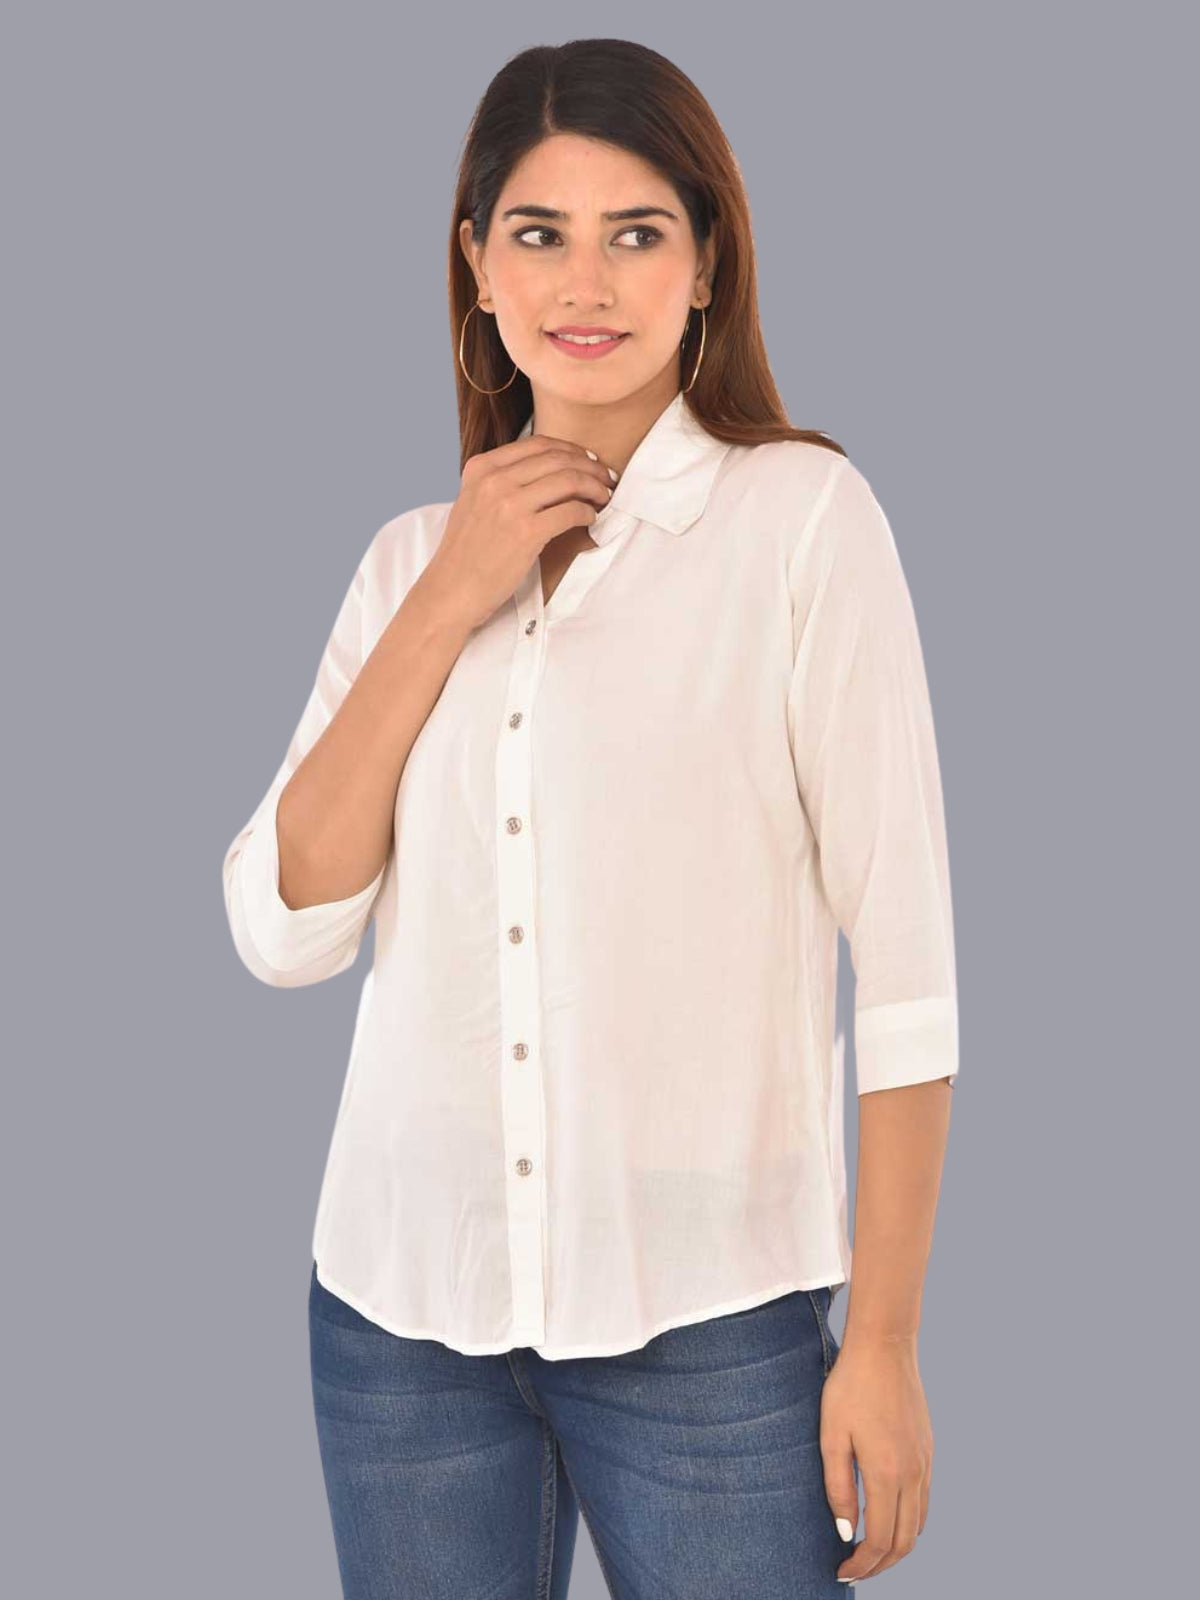 Womens Solid White Regular Fit Spread Collar Rayon Shirt